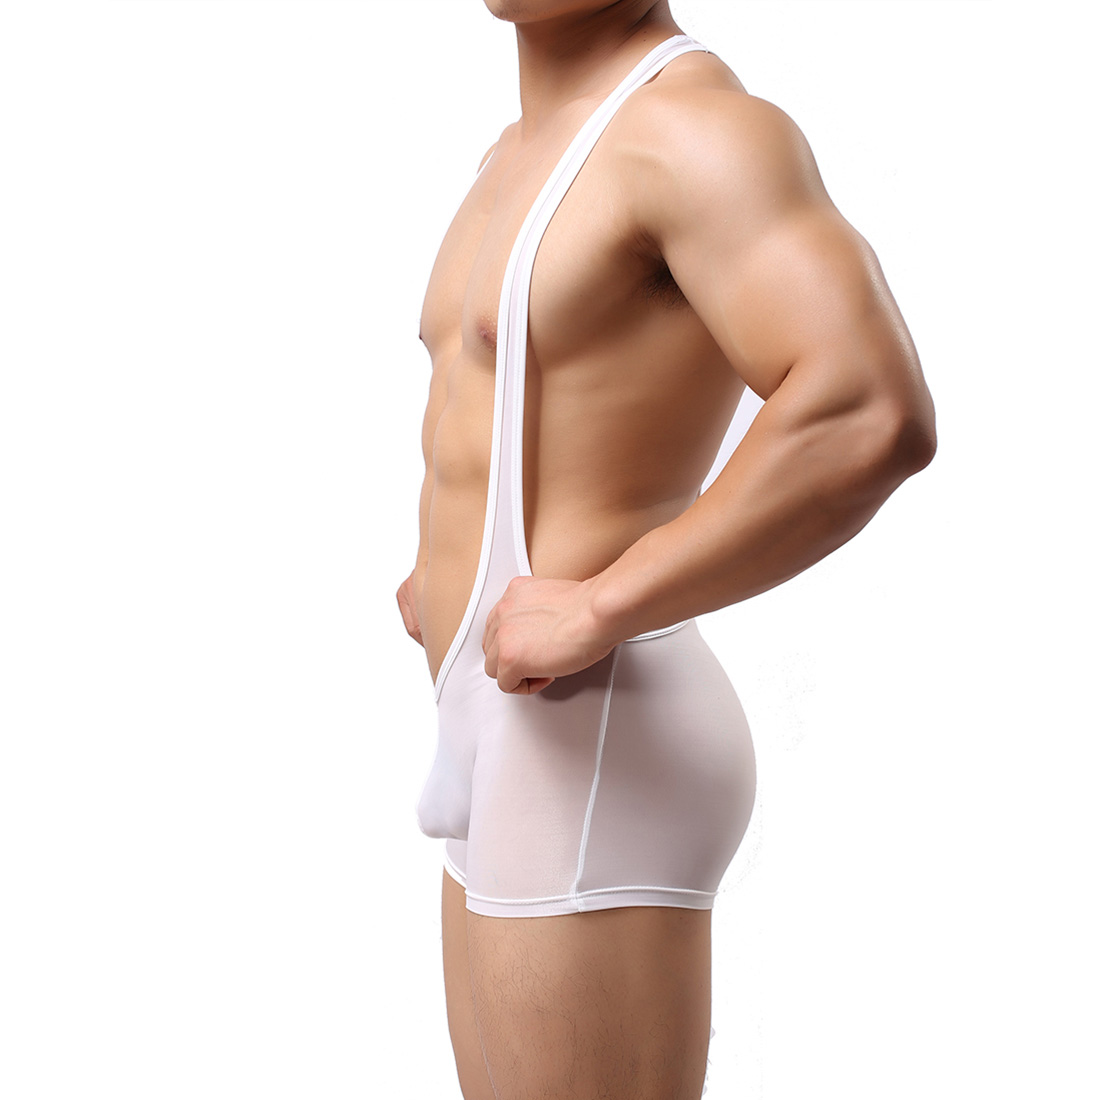 Men's Sexy Lingerie Underwear Sport Fitness One-pieces Swimsuit Wrestling Dress WH41 White M